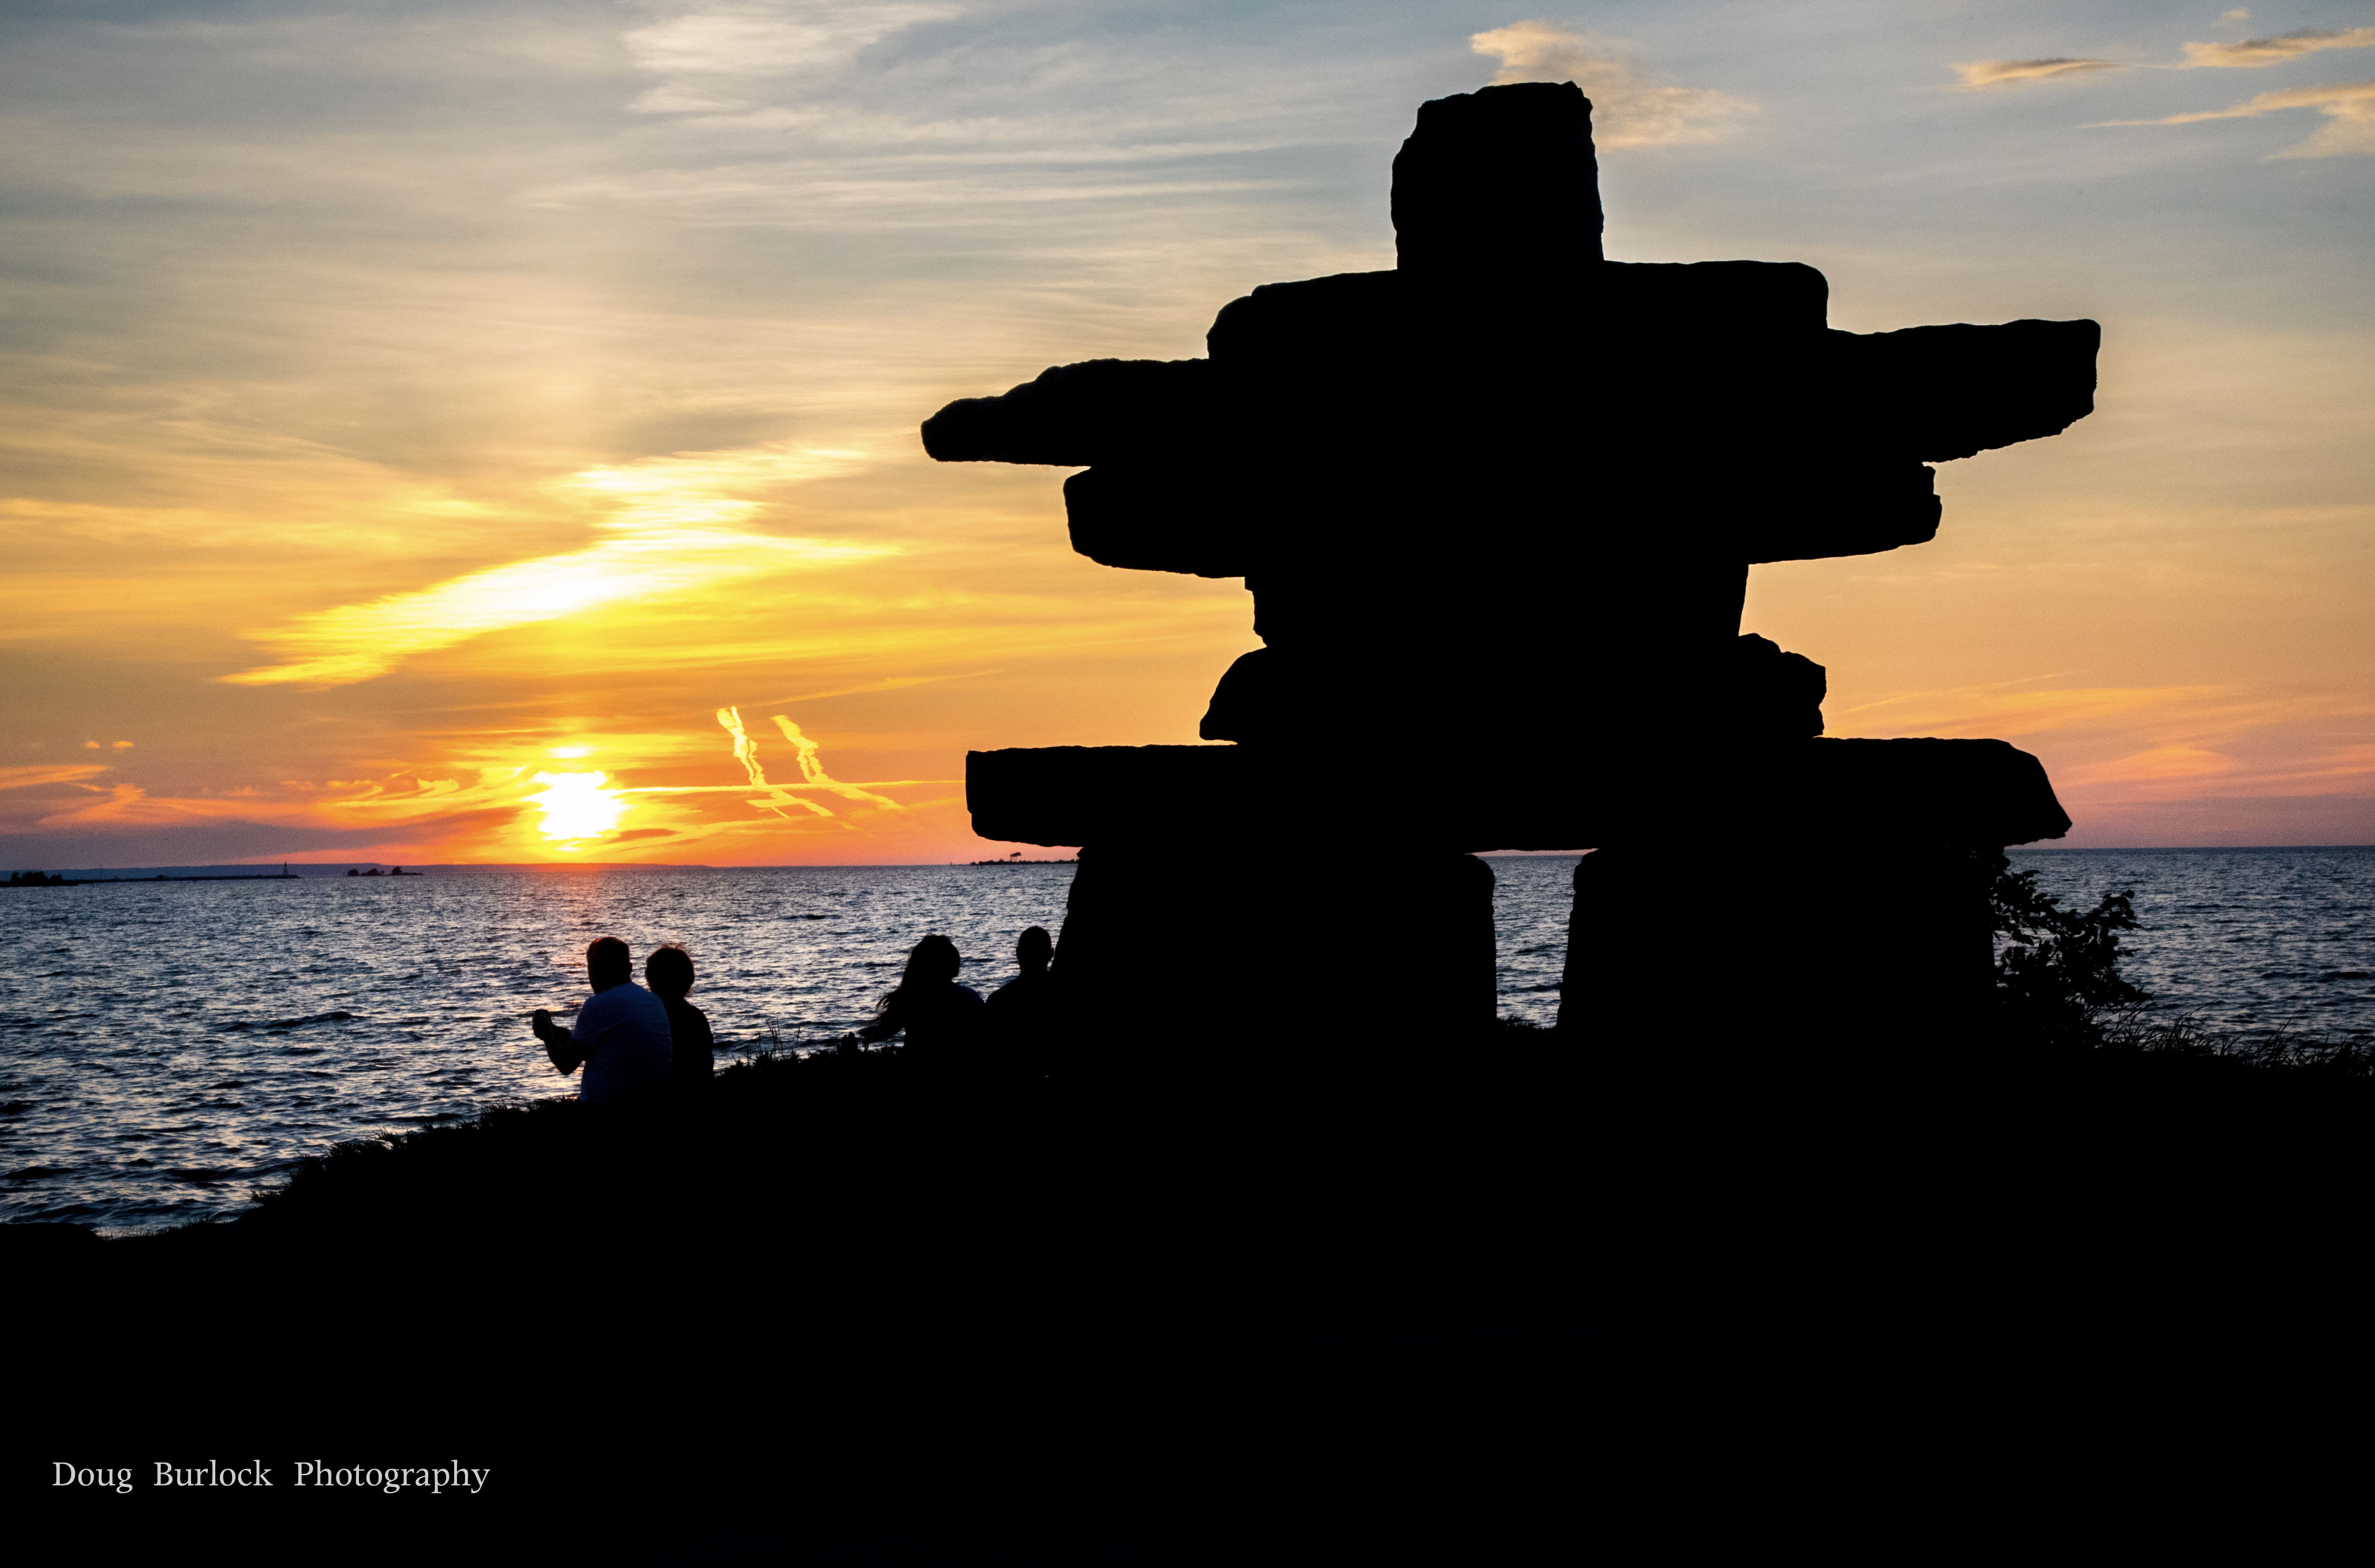 Photo of the Inukshuk with sun setting in the background by Doug Burlock